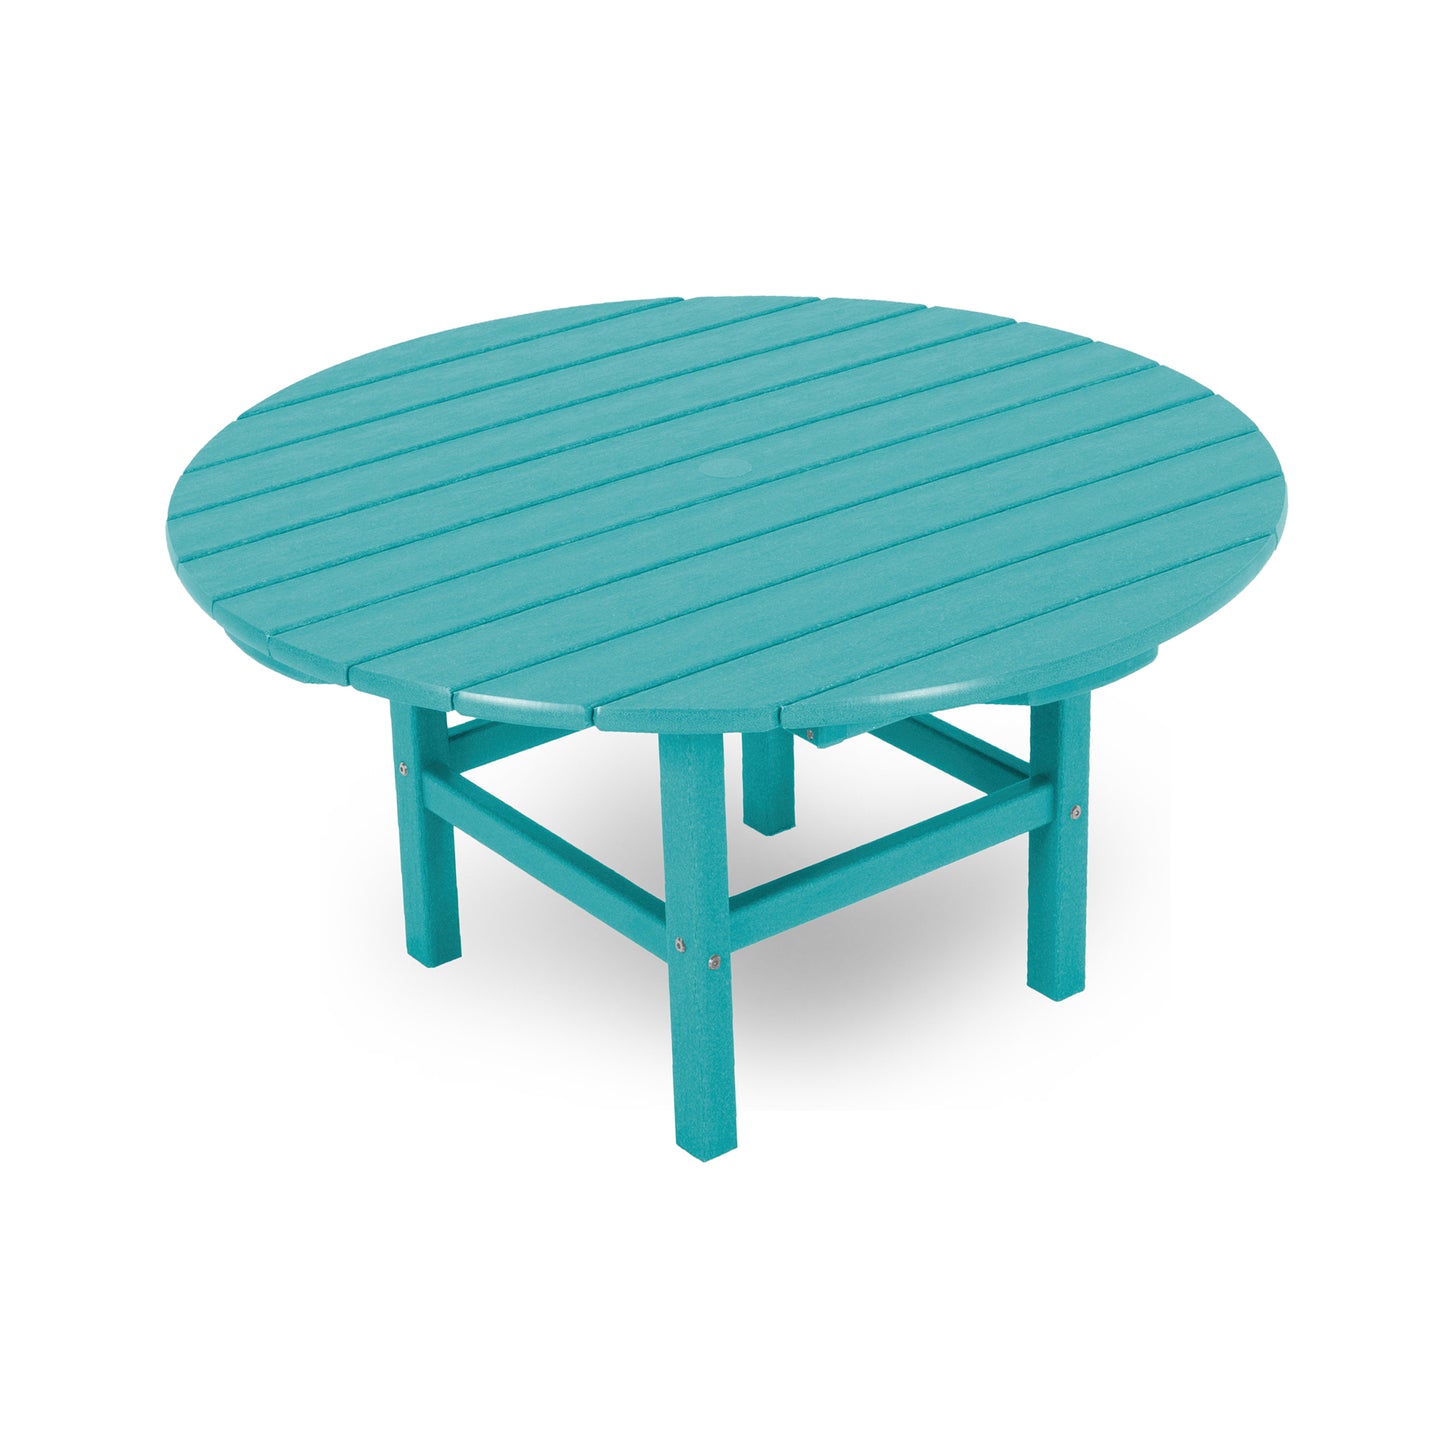 A round, turquoise POLYWOOD Outdoor 38" Conversation Table with horizontal plank design and four sturdy legs, isolated on a white background.